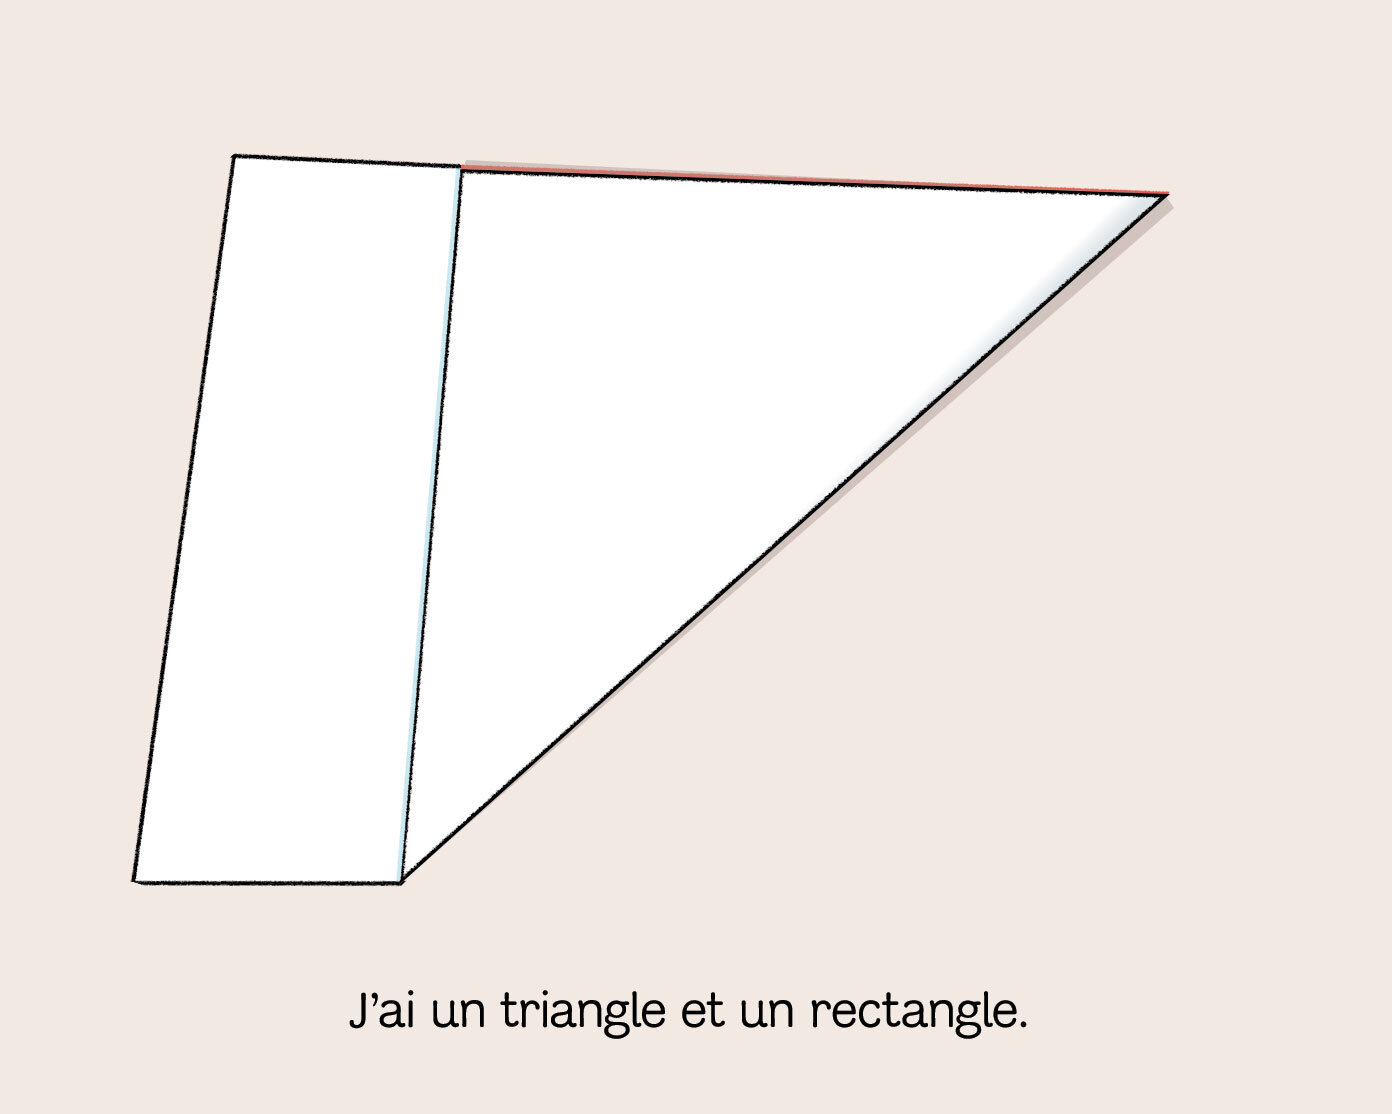 Now I have a triangle and a rectangle